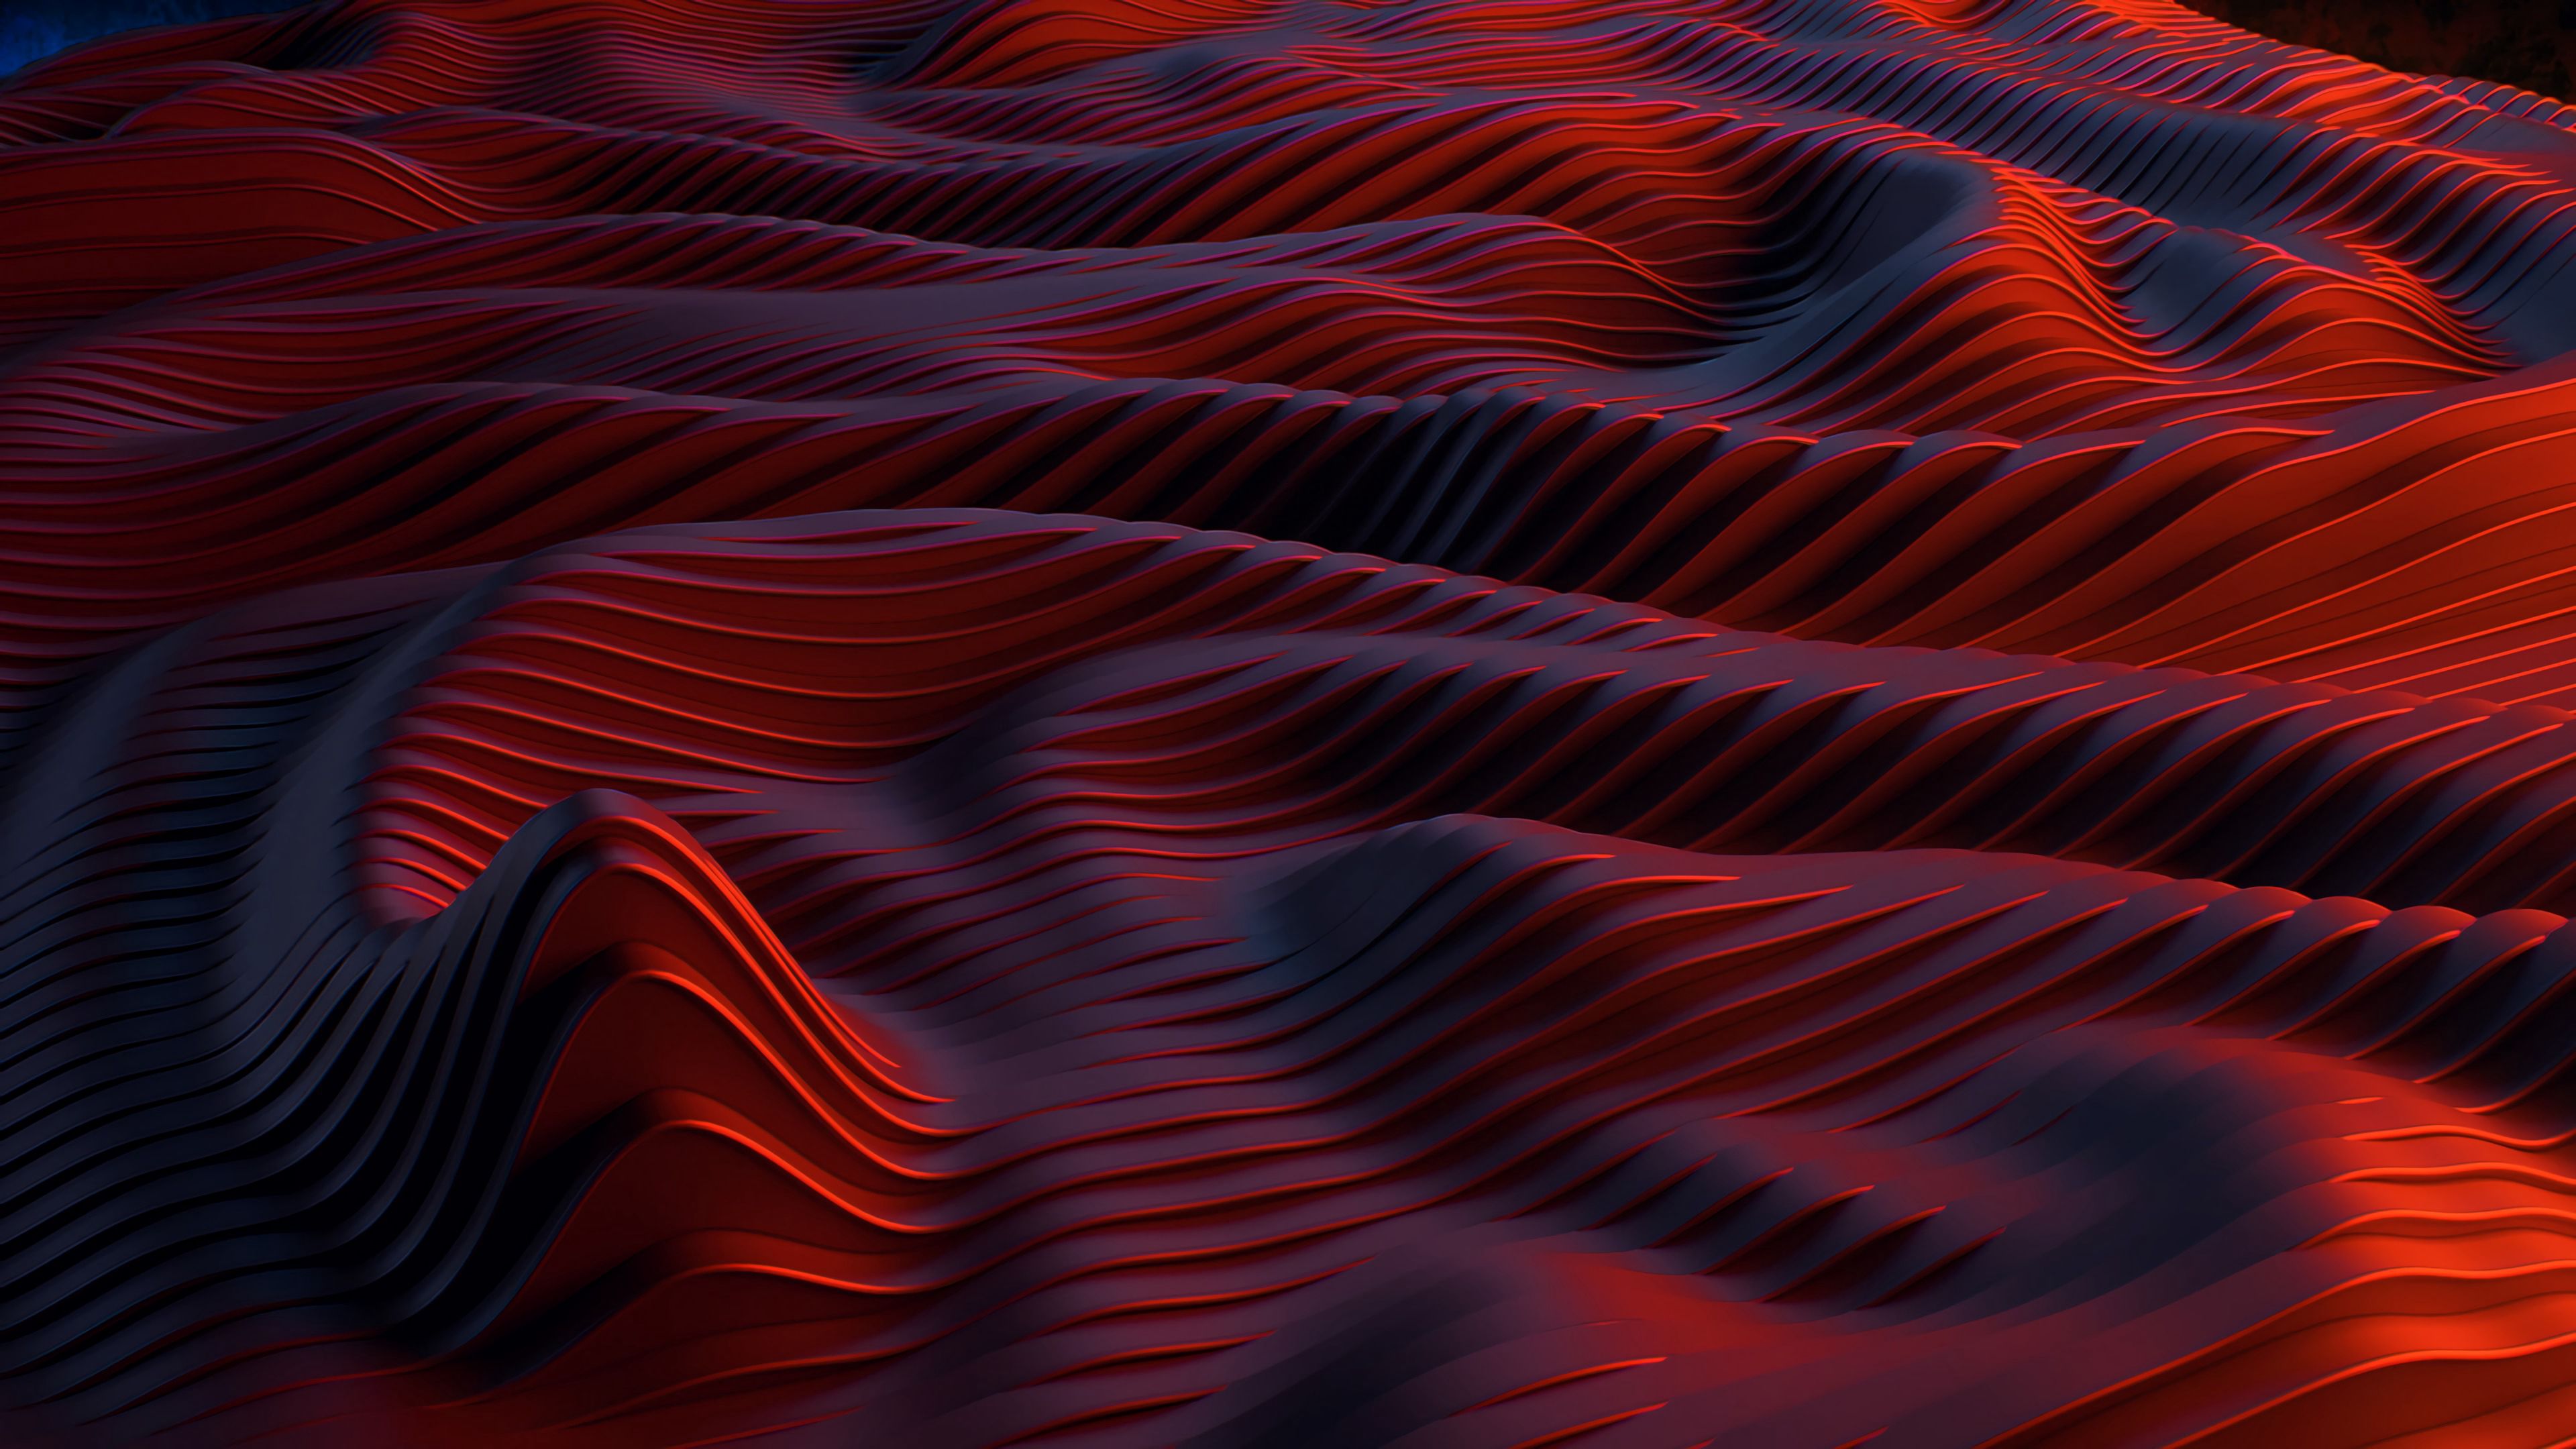 Abstract Digital Art Lines Red Texture Reliefs Colorful 3840x2160